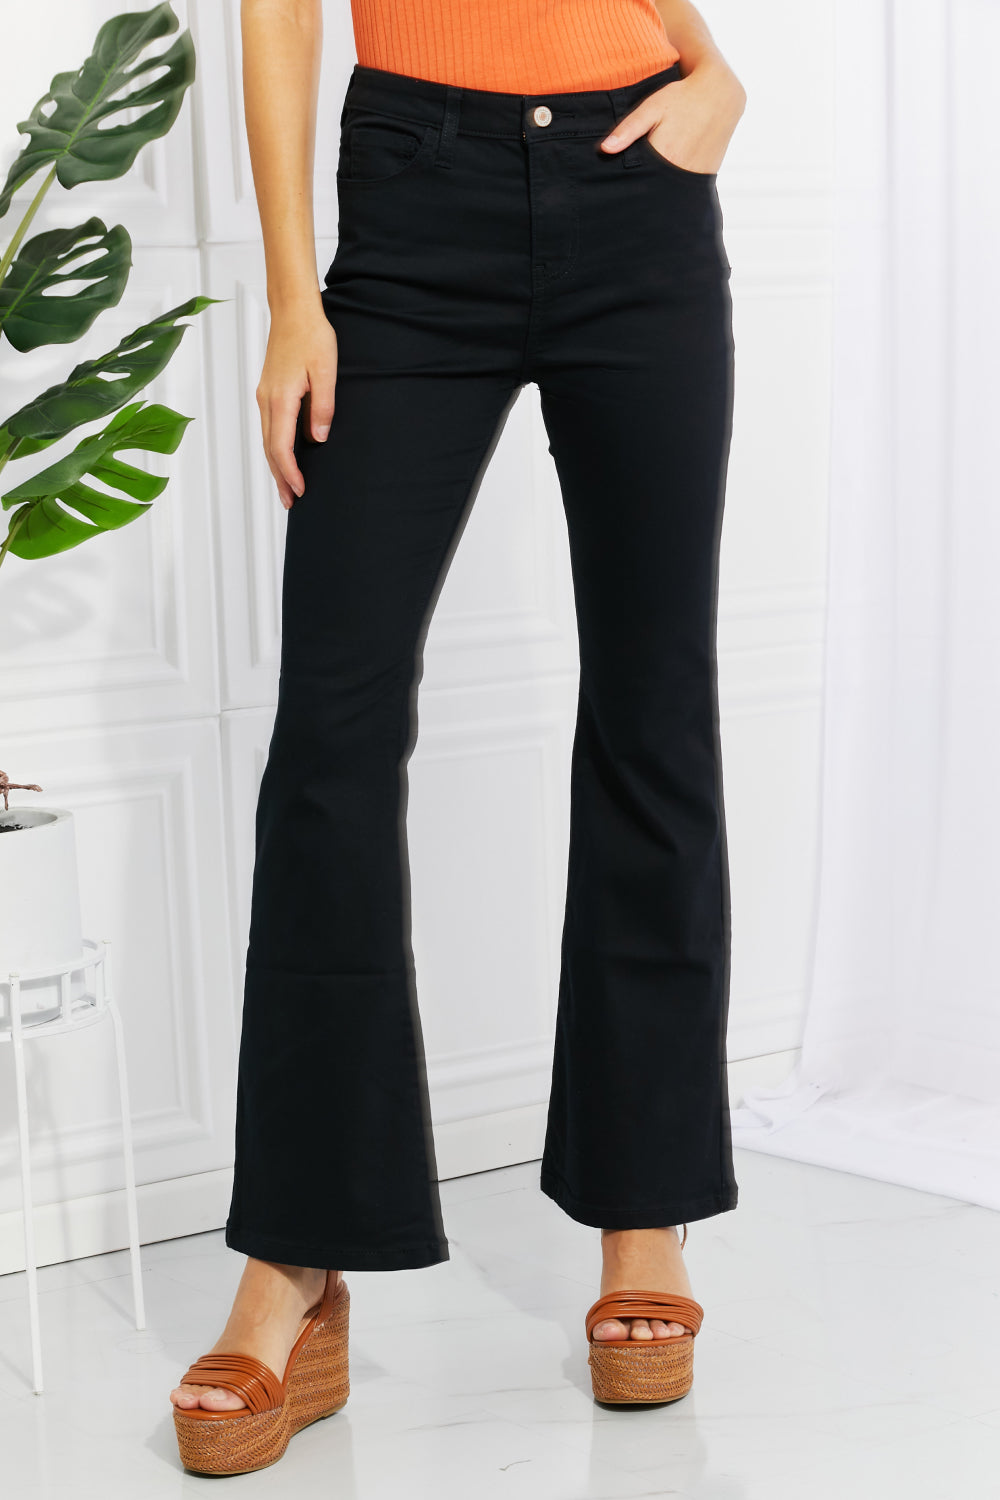 Zenana Clementine Full Size High-Rise Bootcut Pants in Black- ONLINE ONLY 2-10 day Shipping